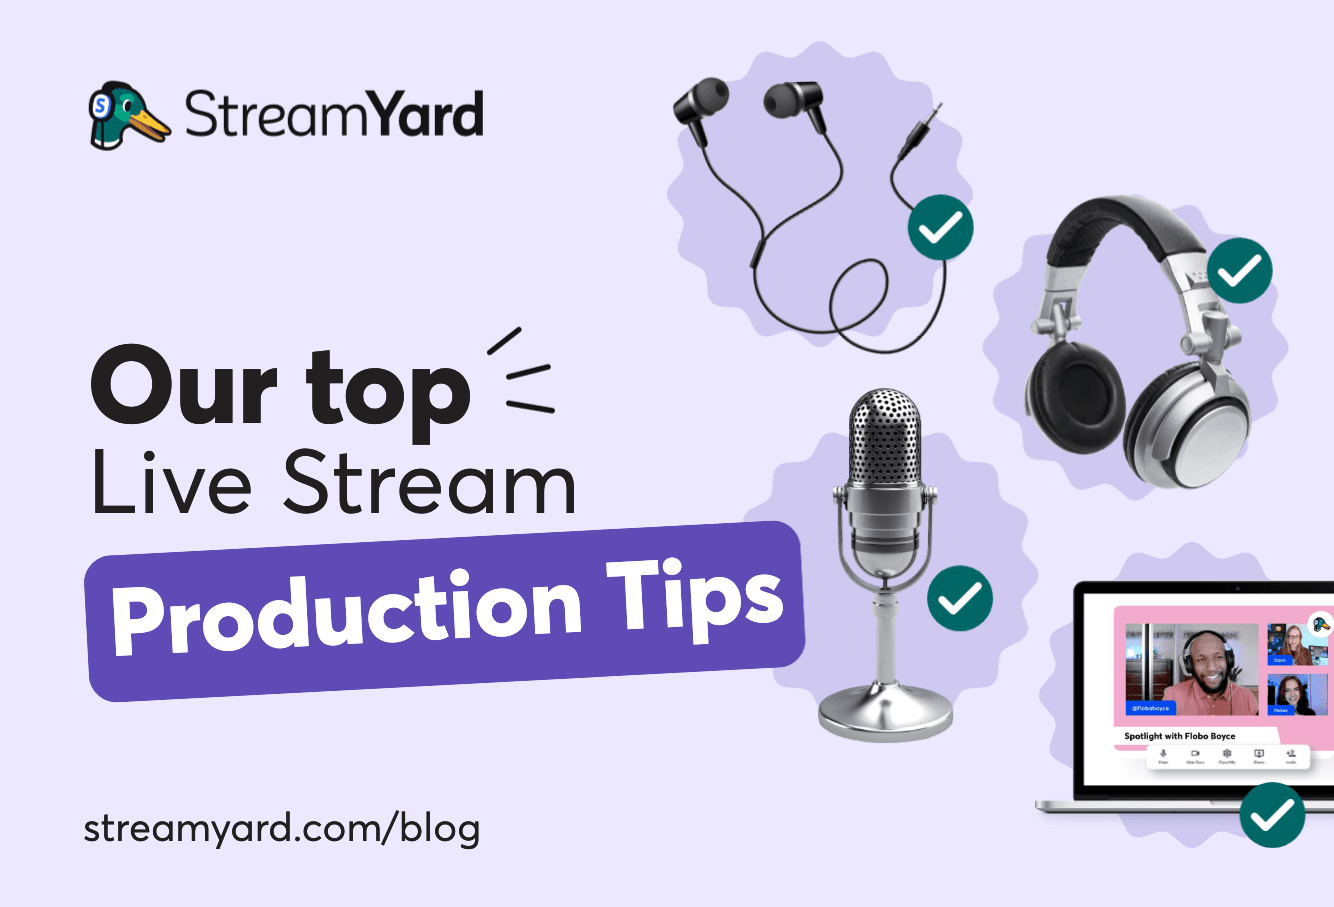 Check out these valuable live stream production tips to understand what the pros recommend for better production without added efforts.